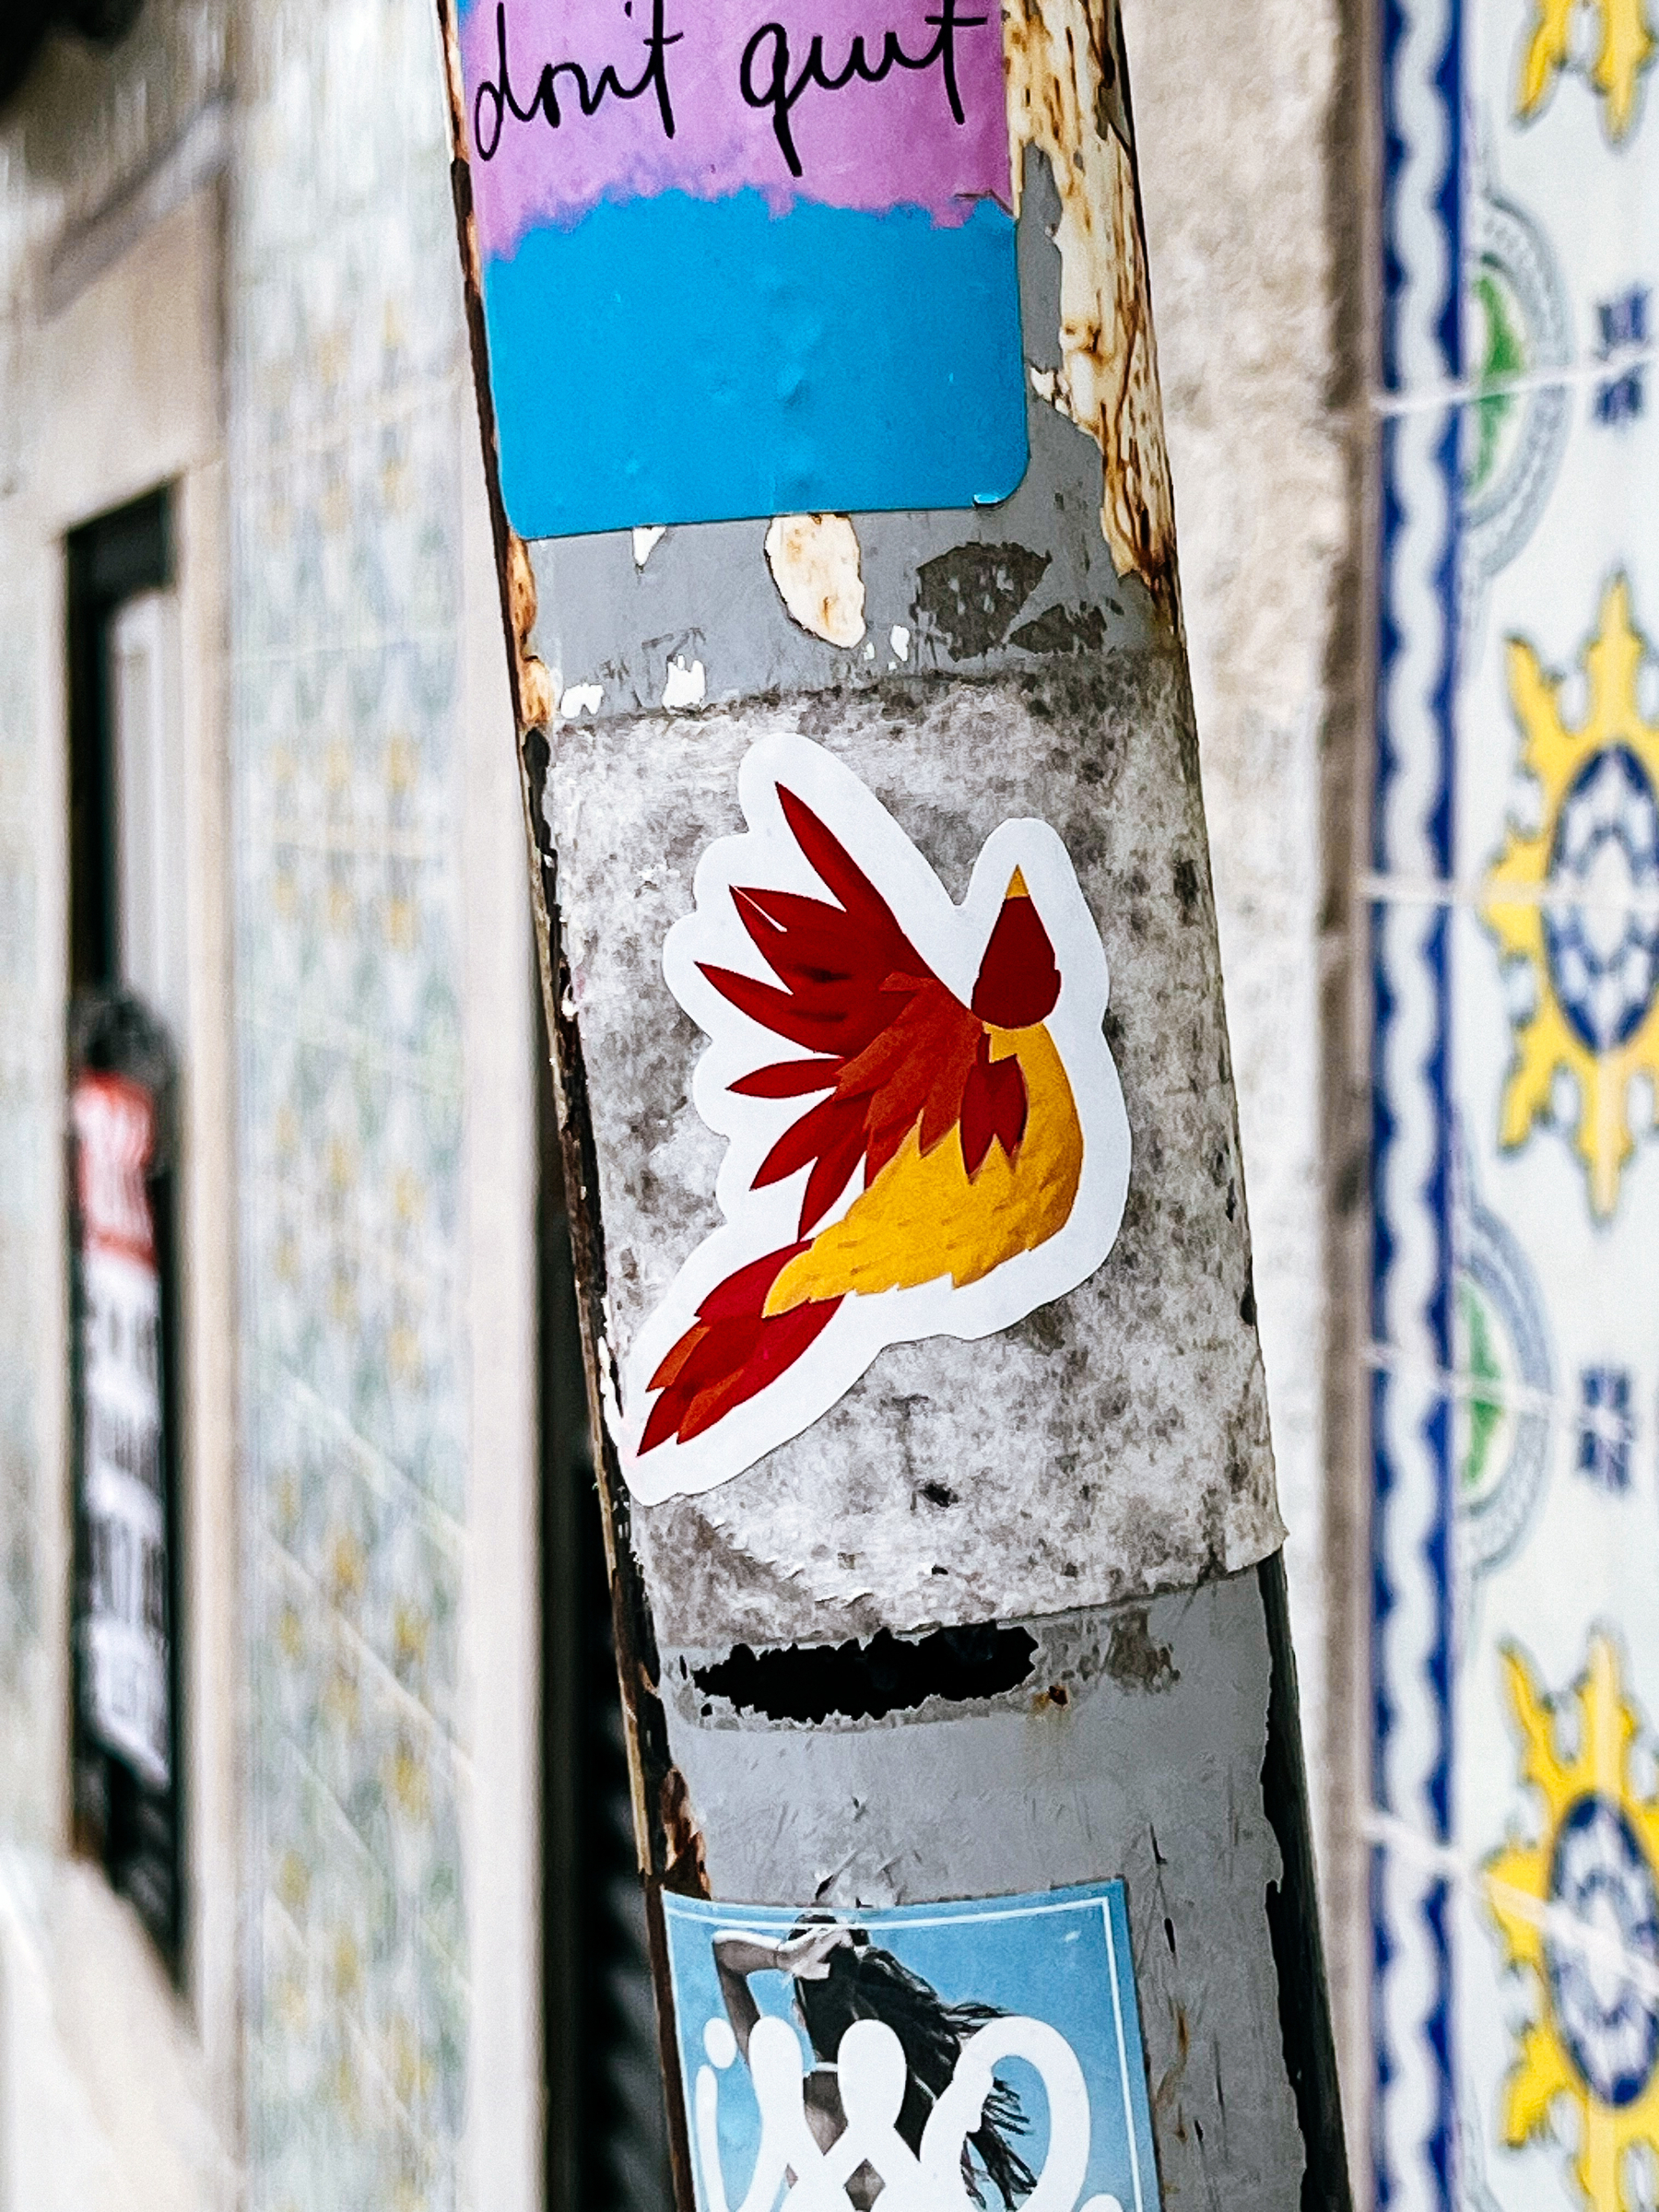 Stickers on a pole, one with a winged design and another saying &ldquo;don&rsquo;t quit,&rdquo; next to decorative tiles.